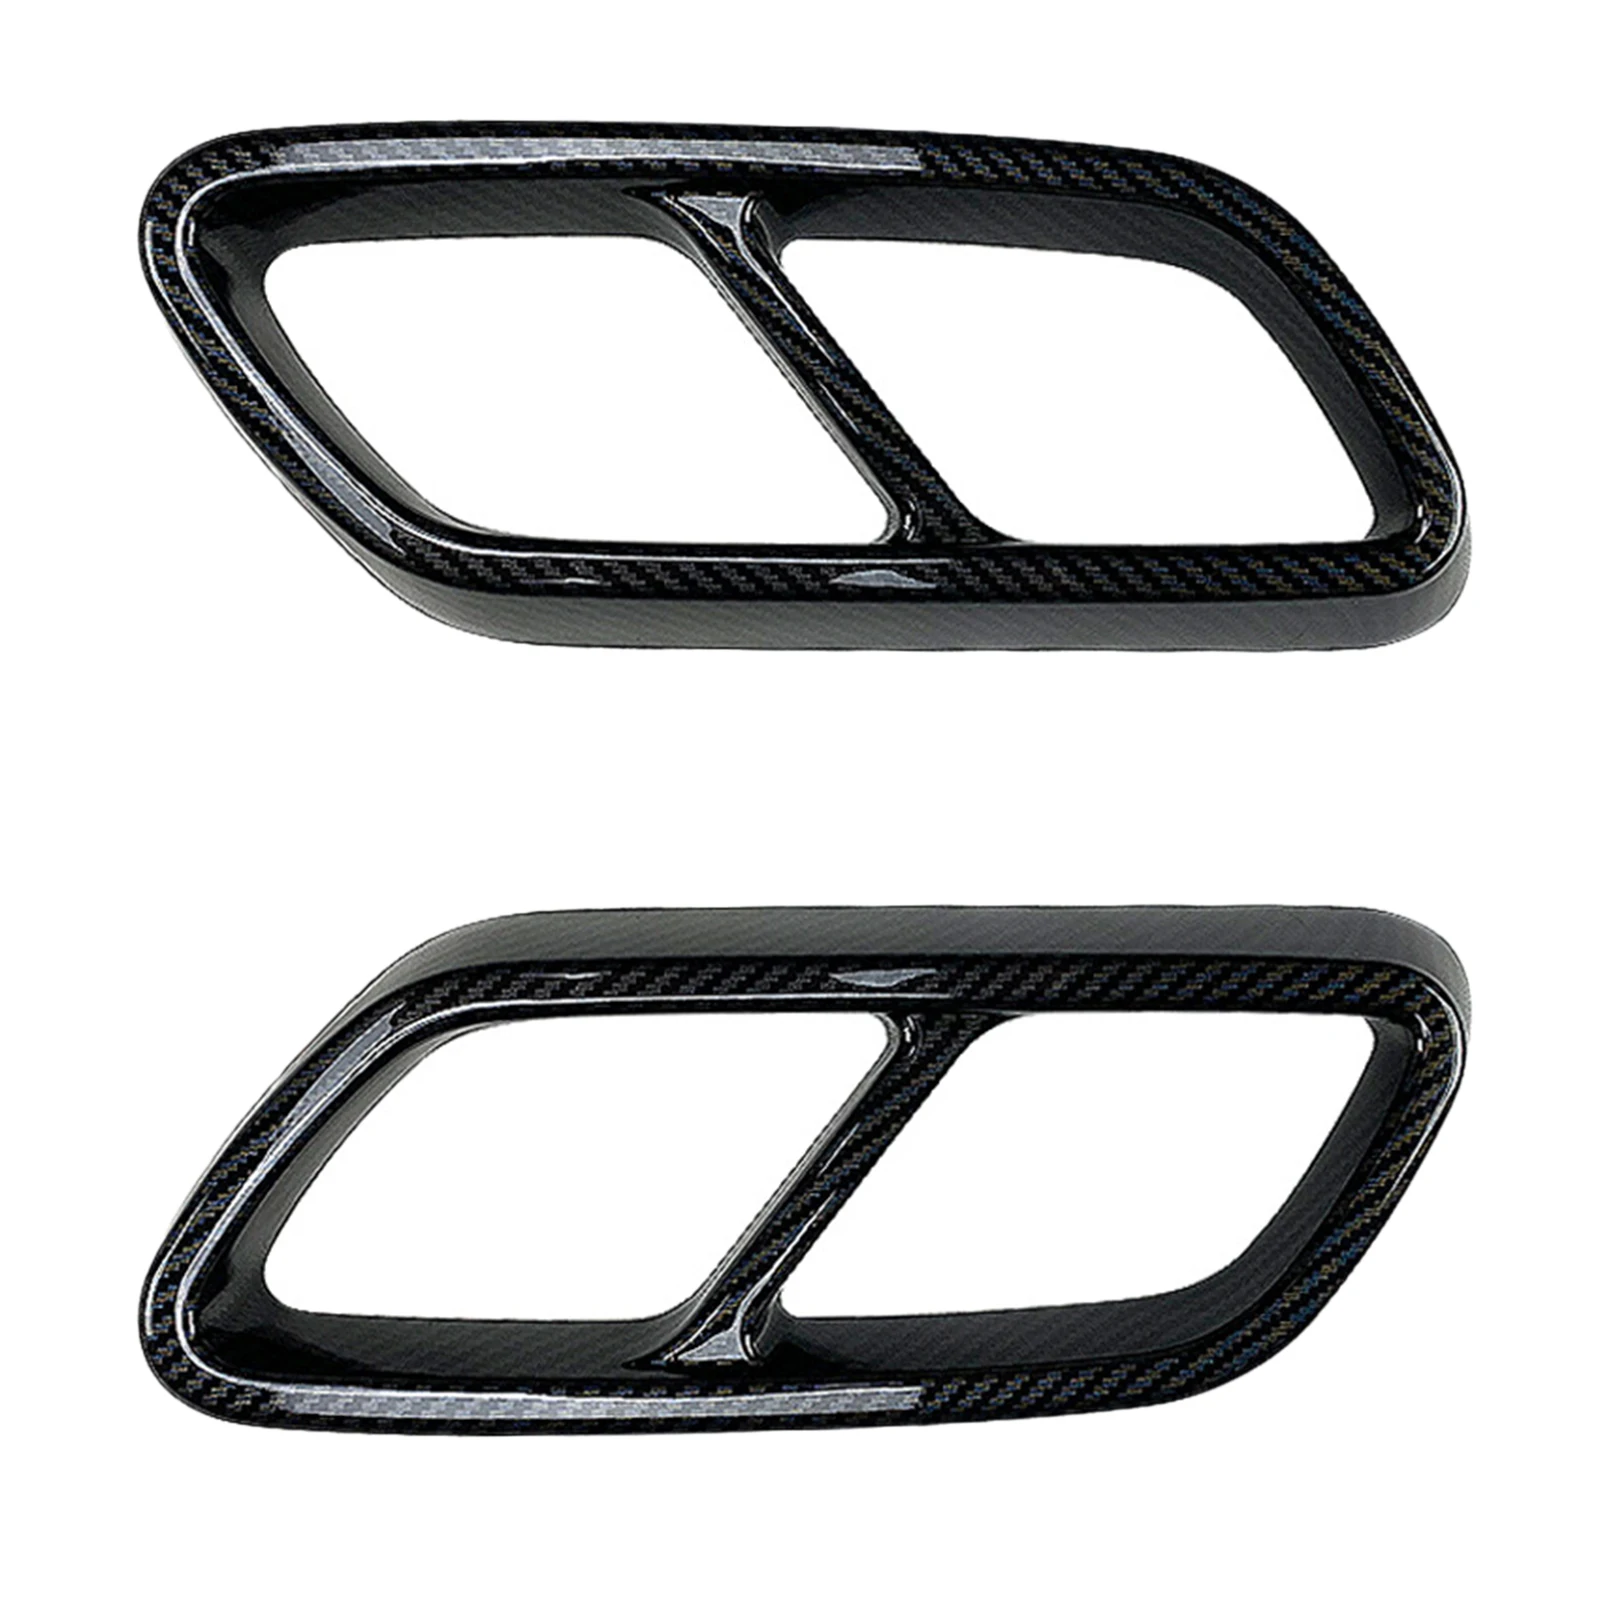 2Piece Exhaust Pipe Cover Trim Muffler Durable for x253 2015-2018 C GLC